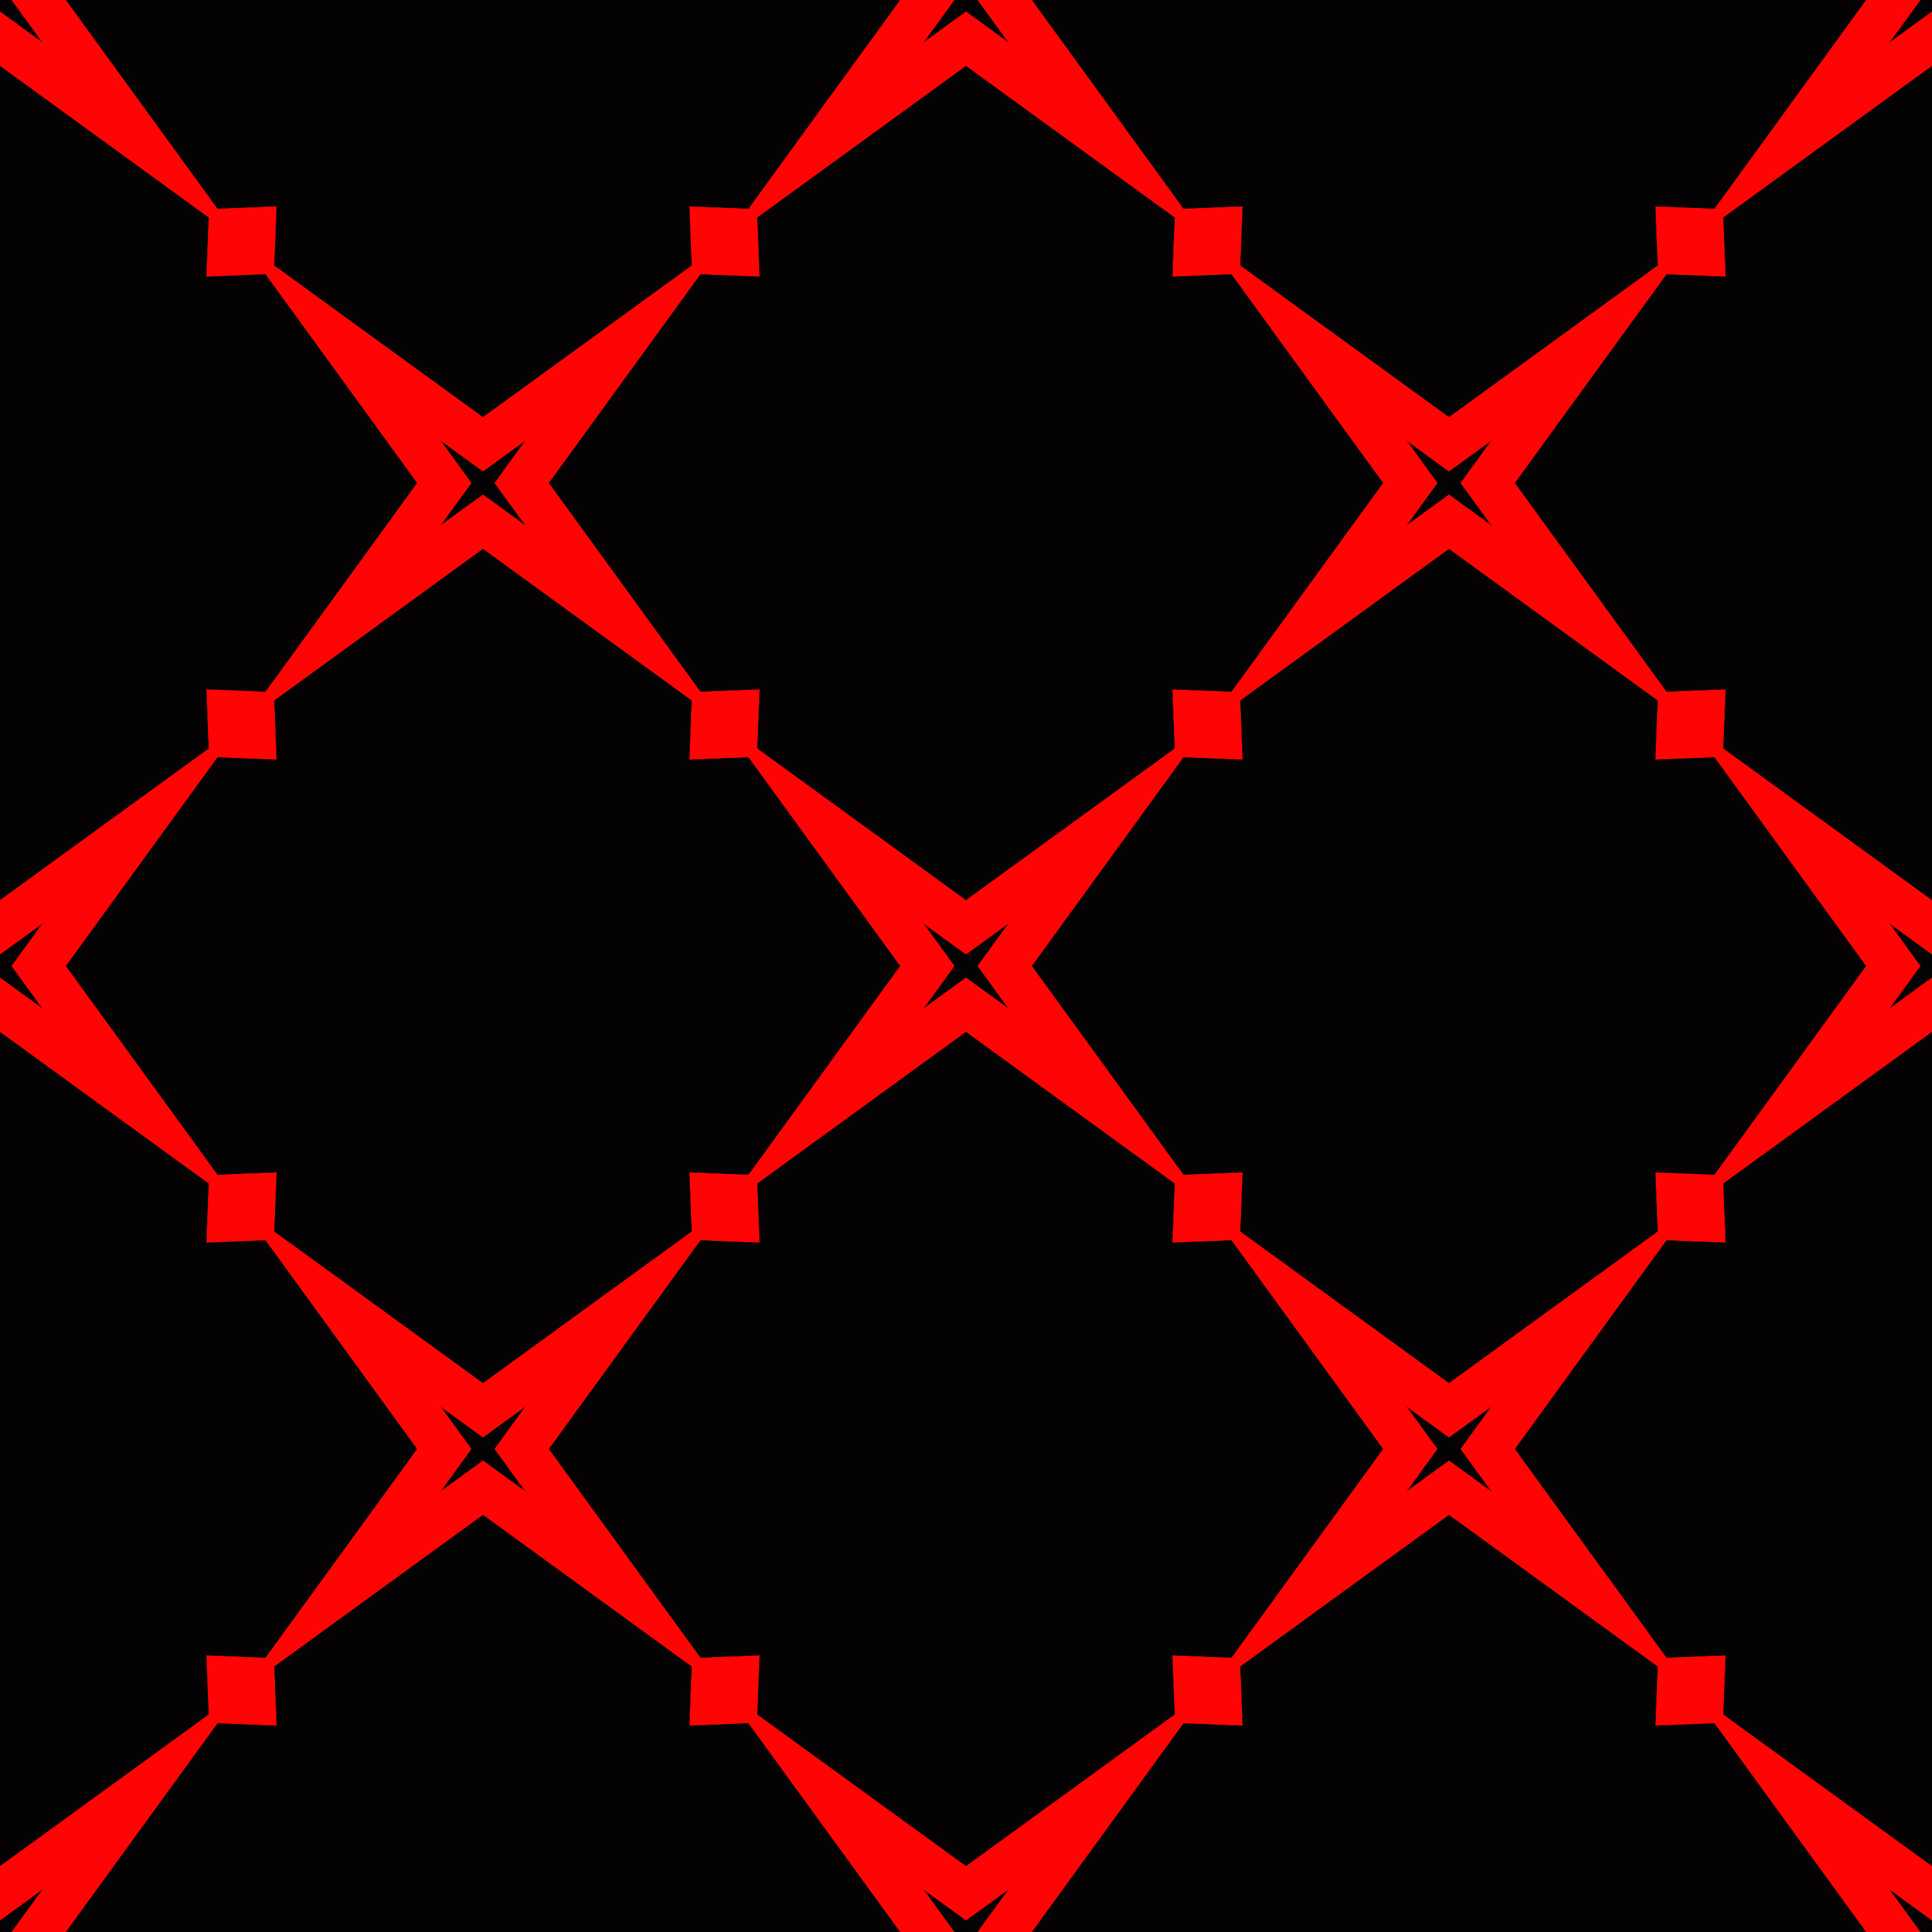 grid, red, abstract, pattern, texture, textures, symmetry 1080p